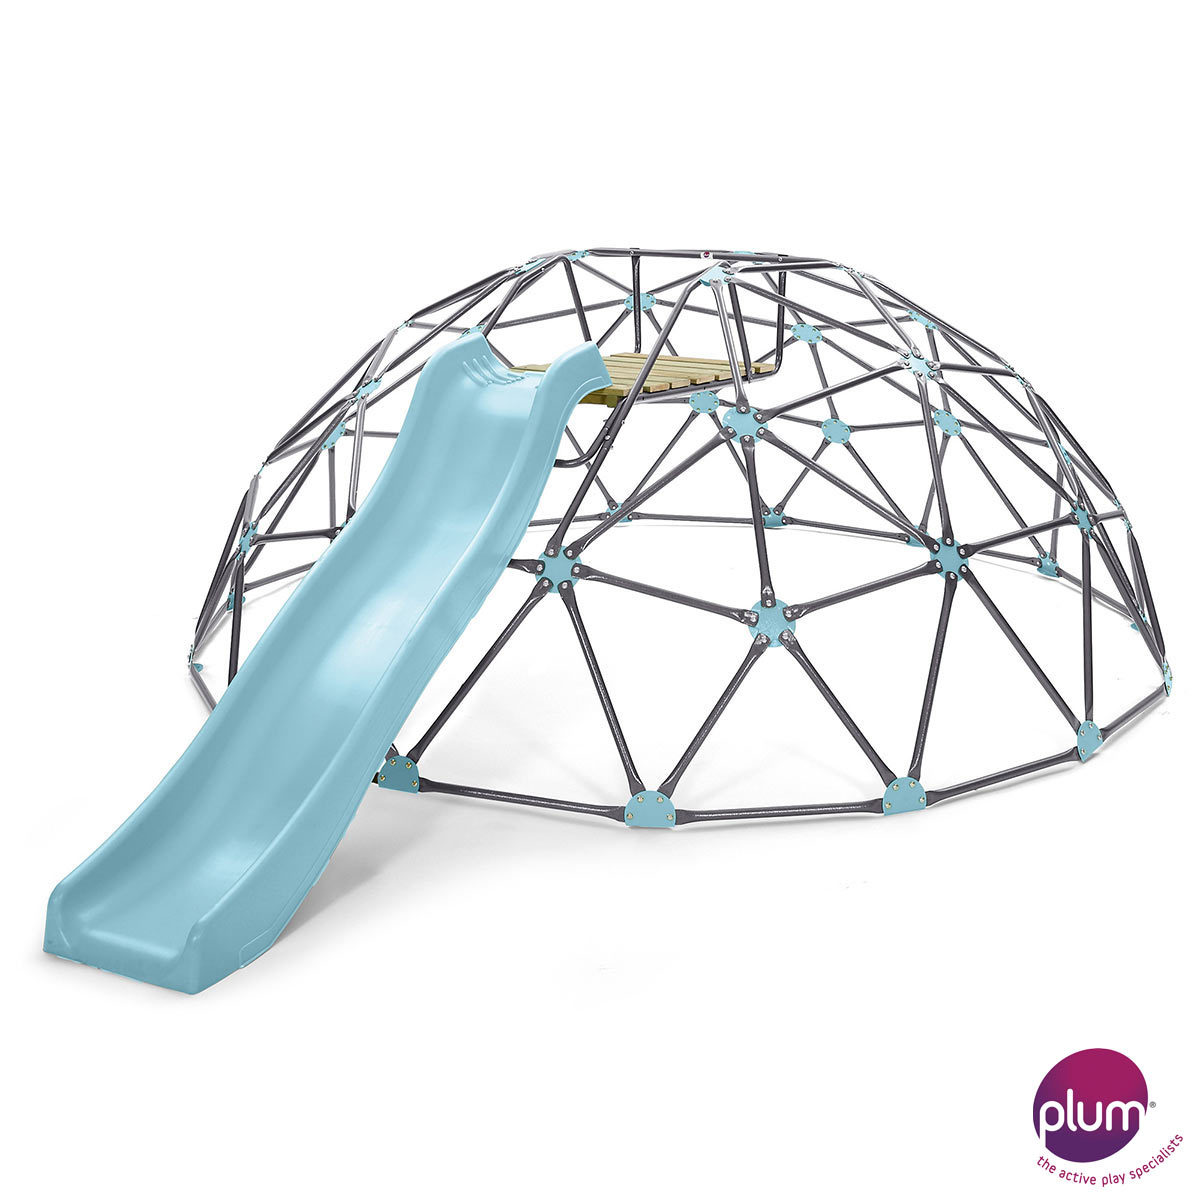 Plum Giant 4ft Climbing Dome with 6ft Slide (3+ years)